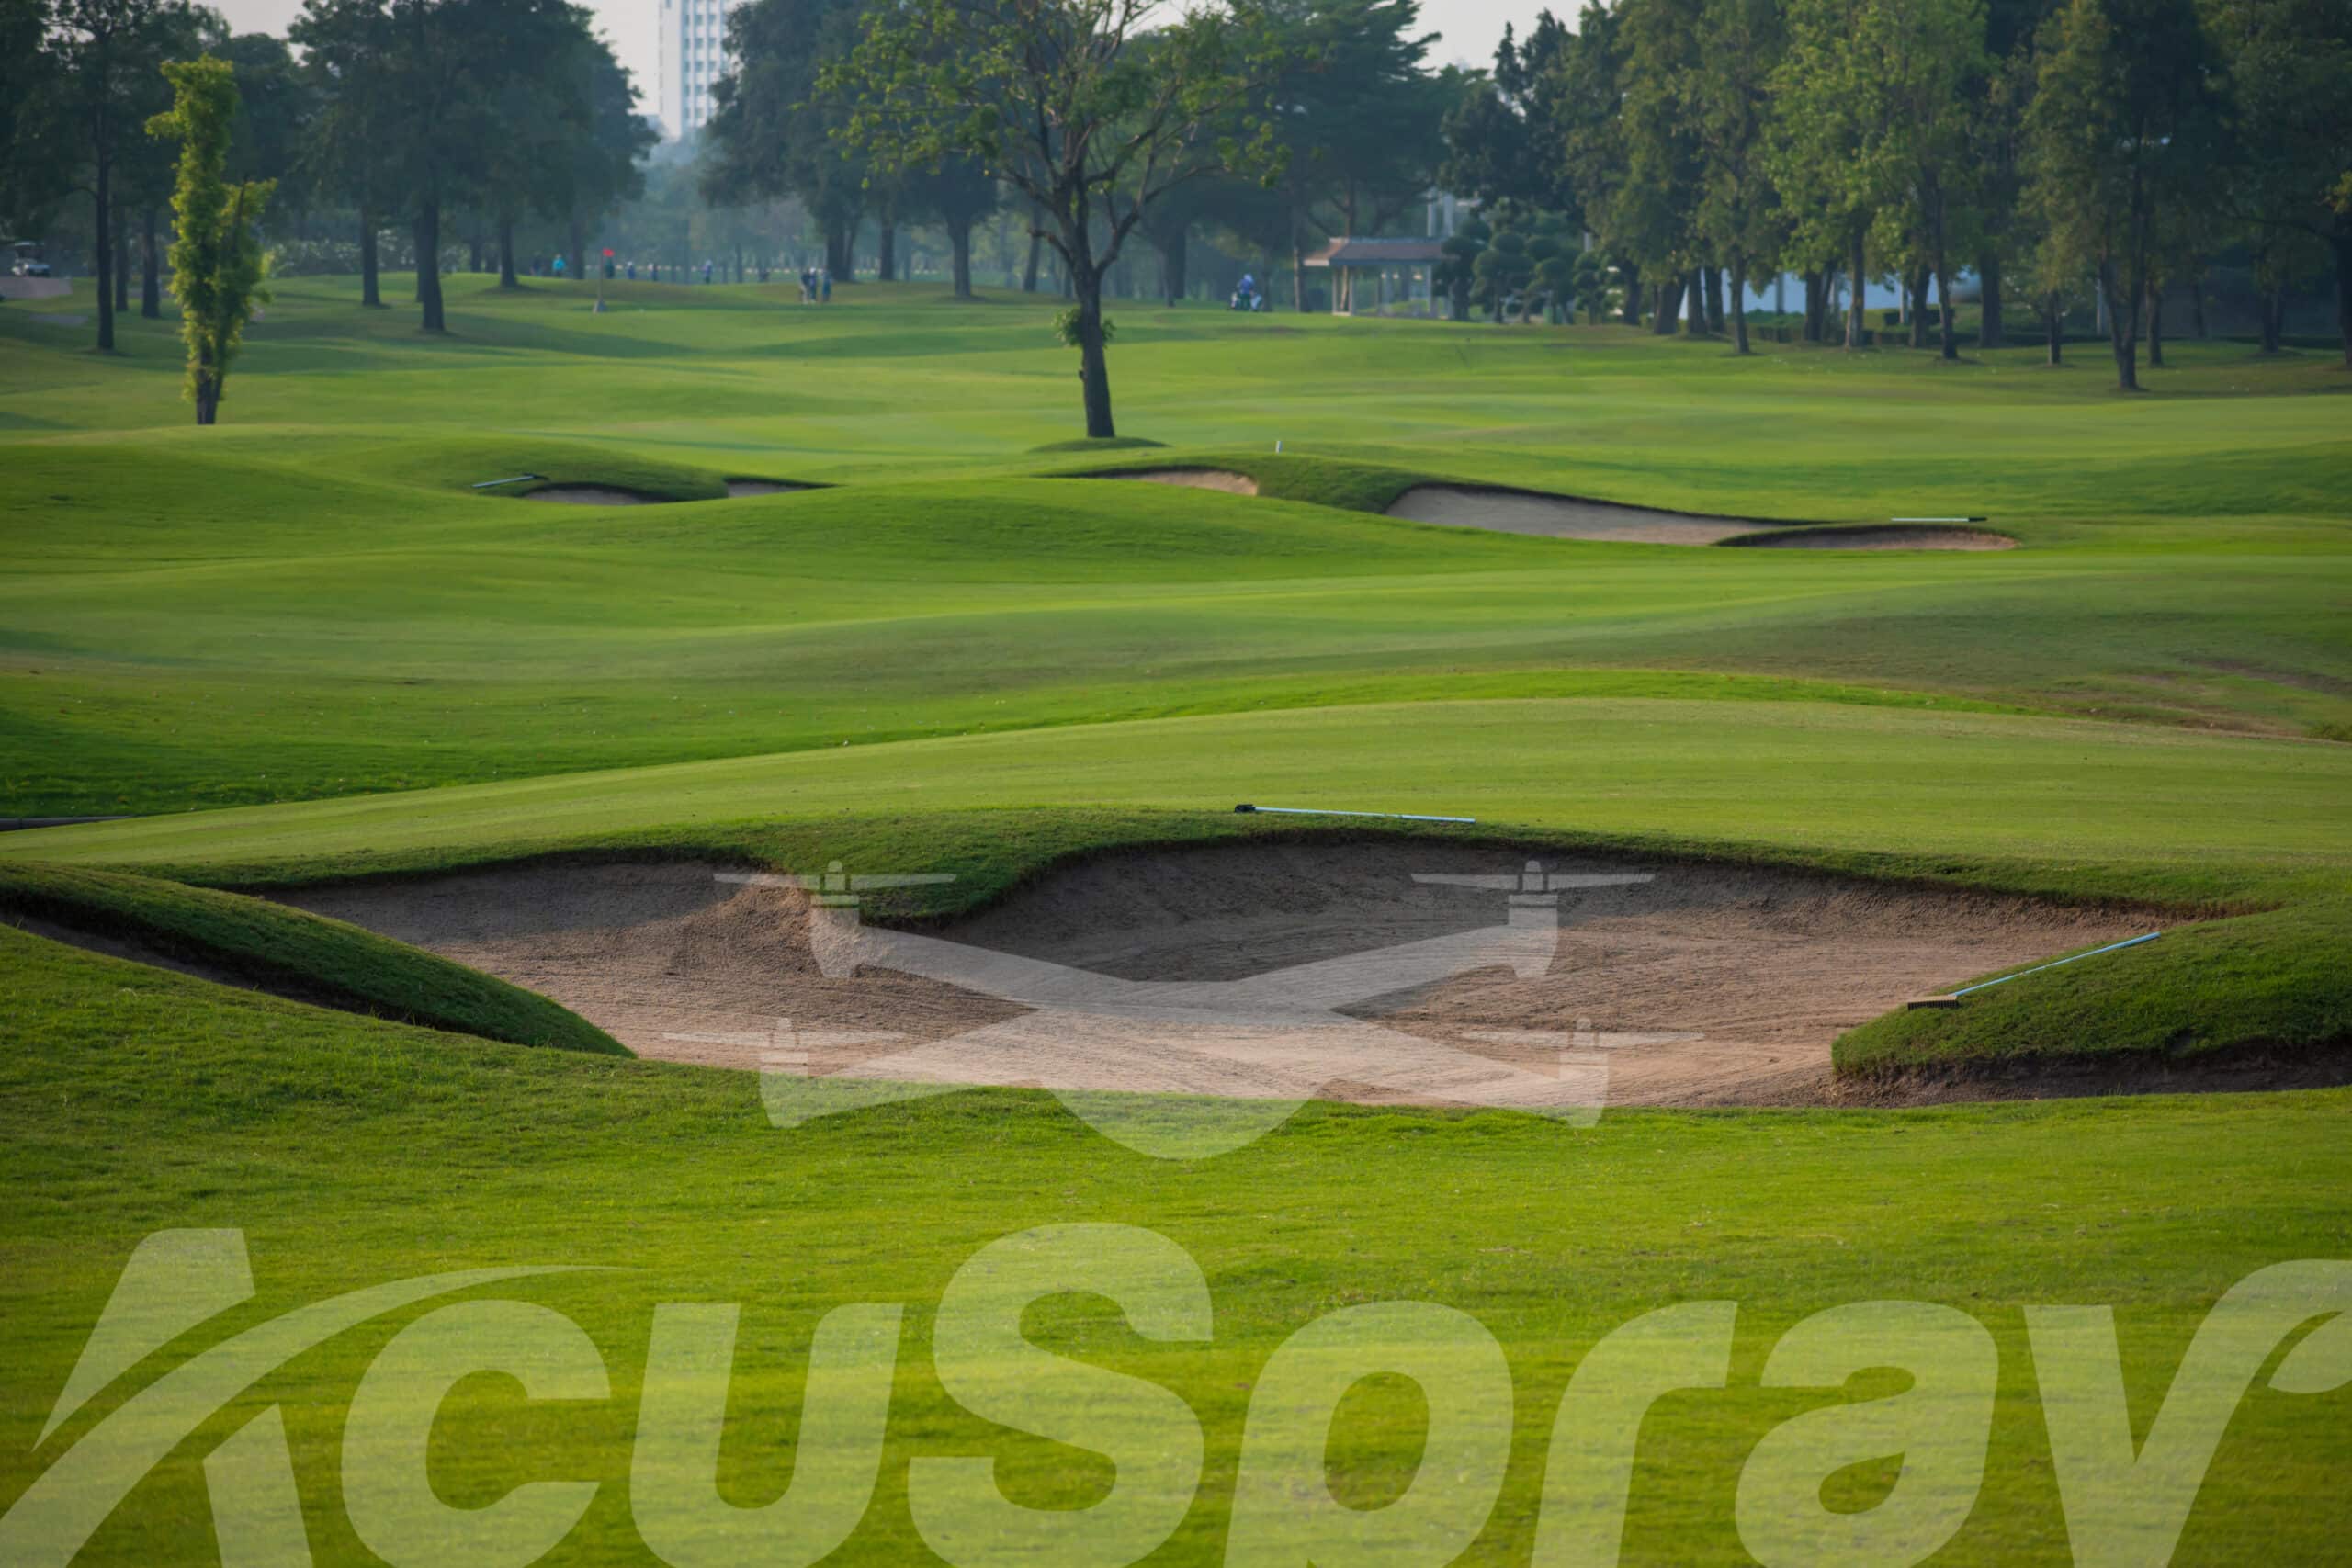 Bunkers and lush greenery of a Michigan golf course, a testament to effective management against turf diseases.